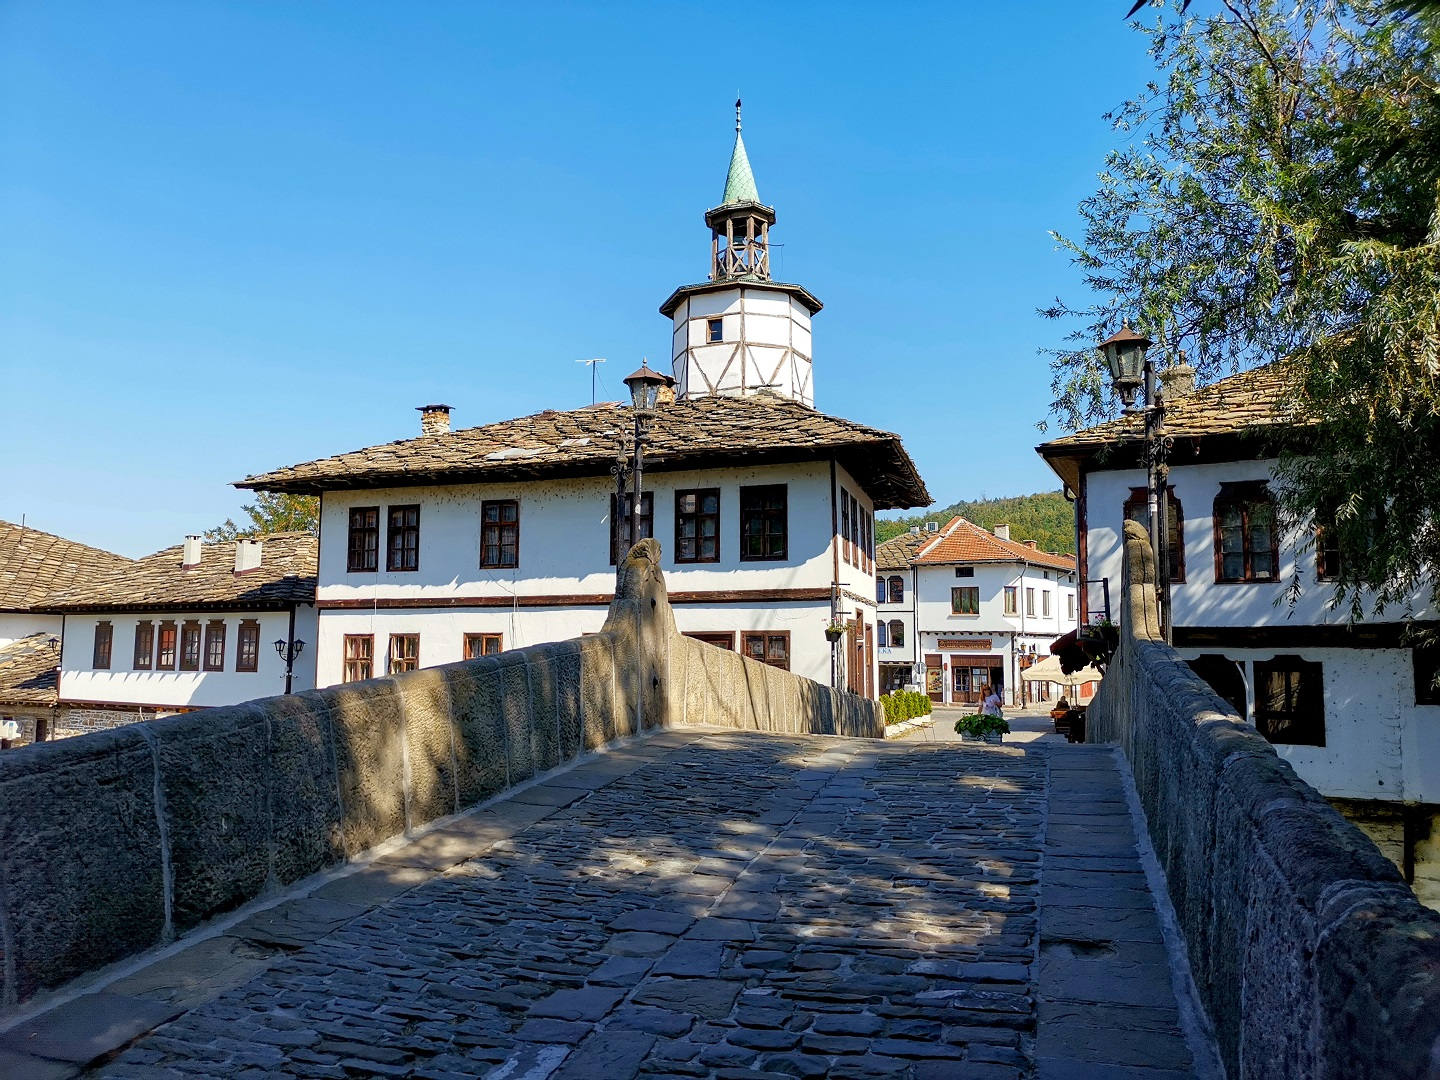 The clock tower and stone bridge in Tryavna